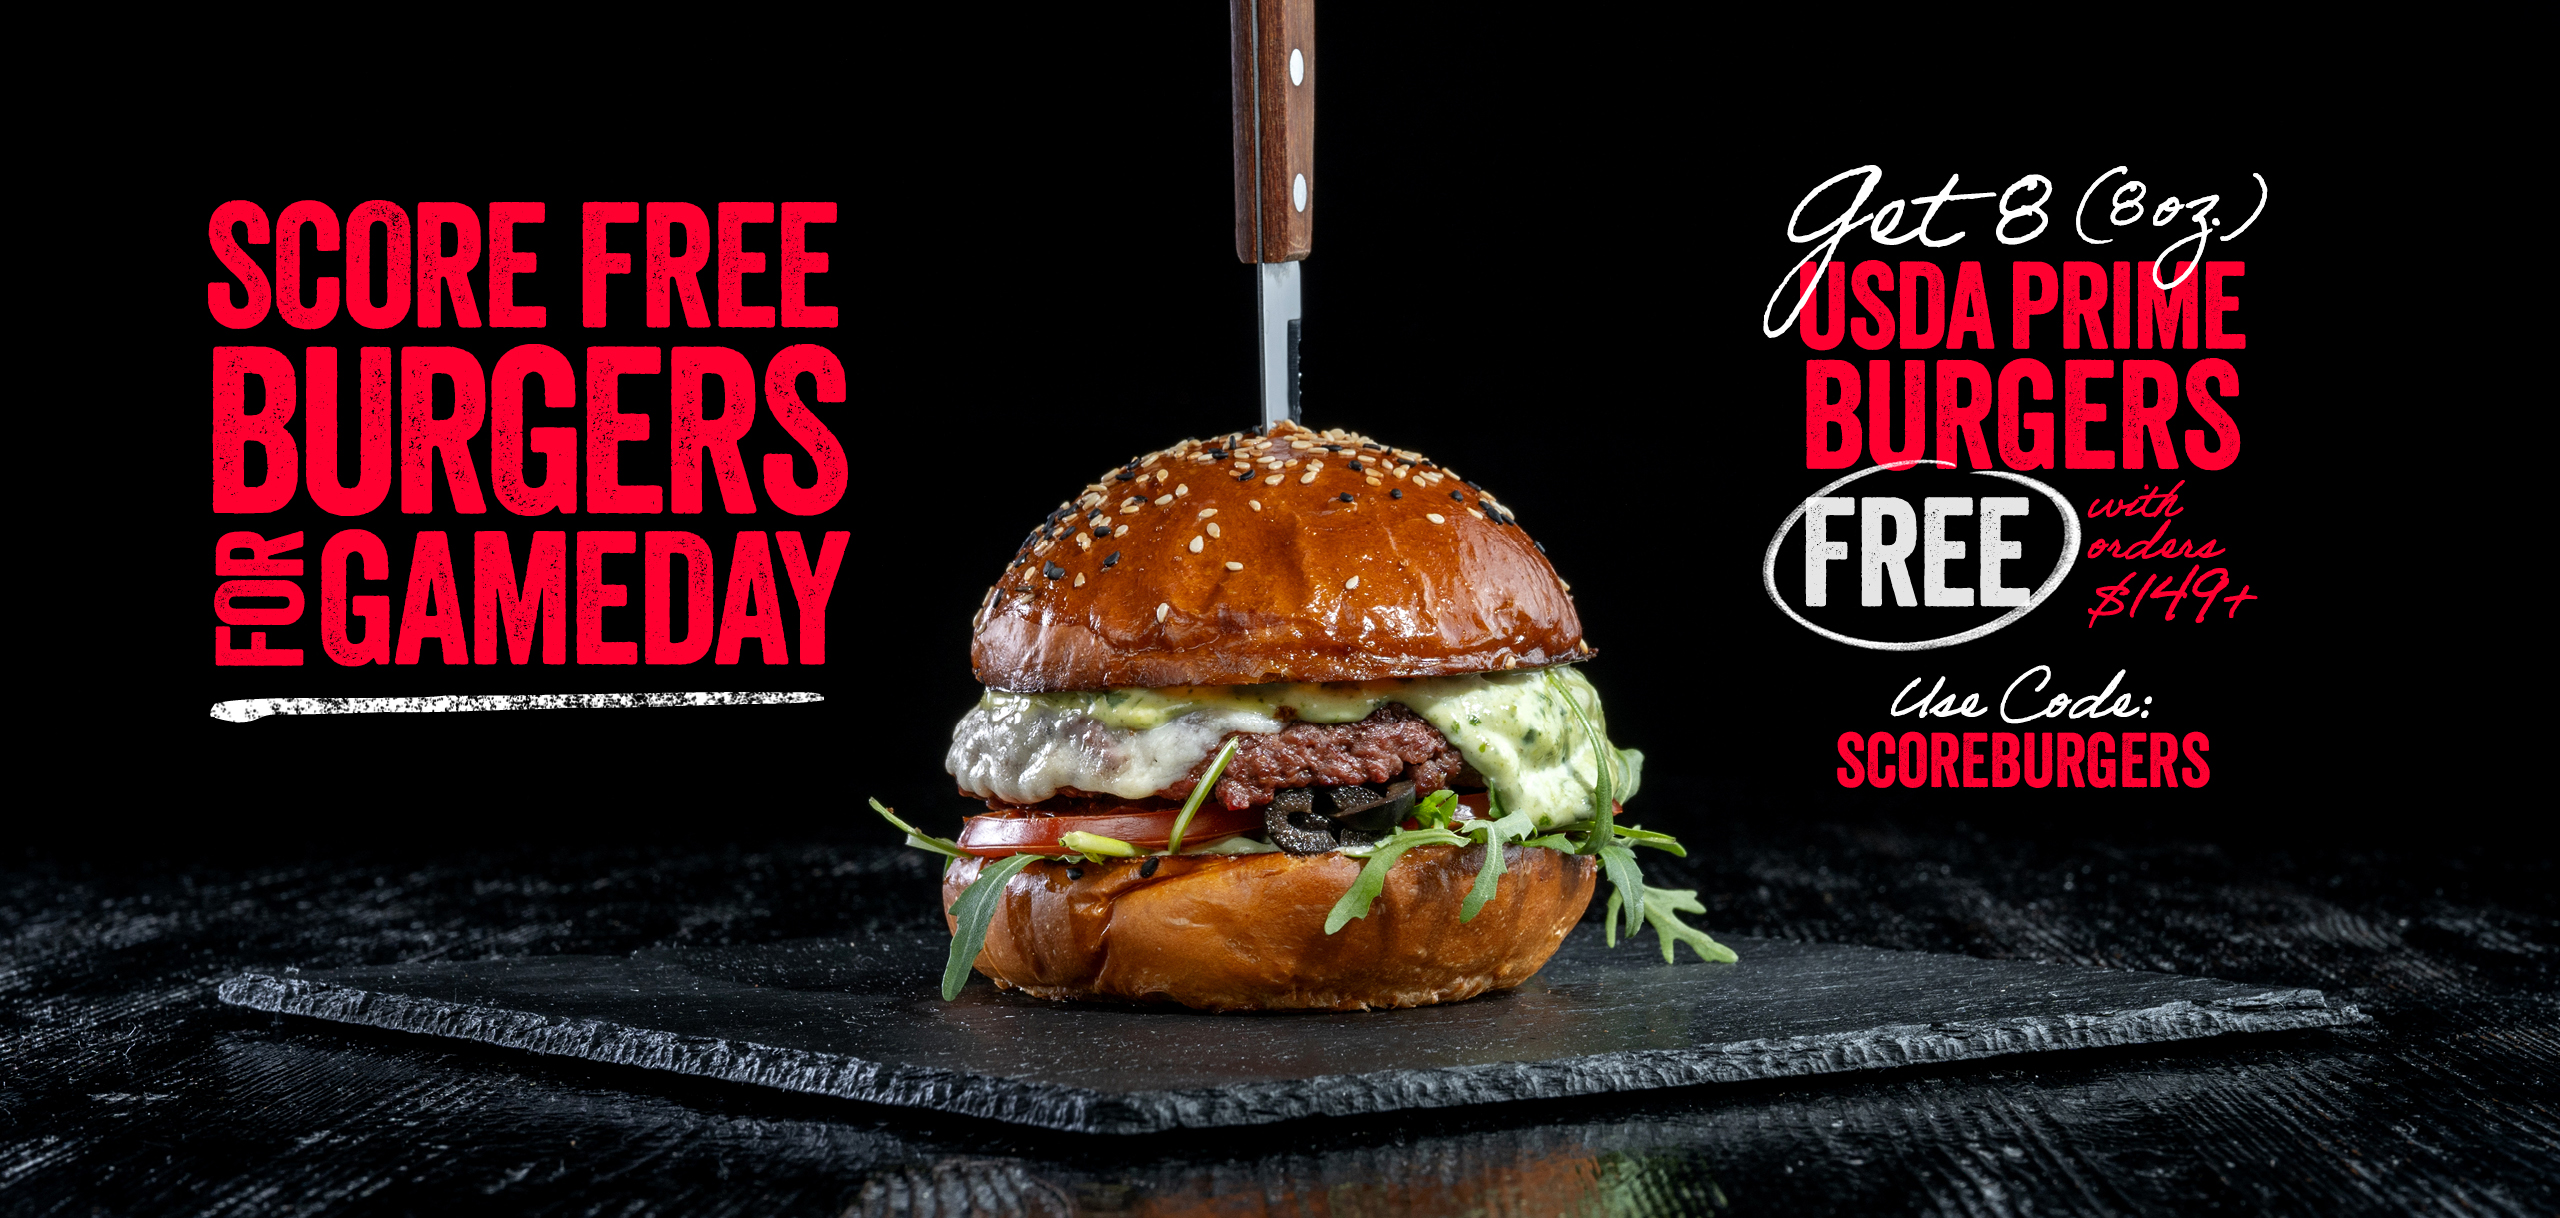 Free burgers for game day. Get 8 (8 oz.) USDA Prime Burgers FREE with orders $149+